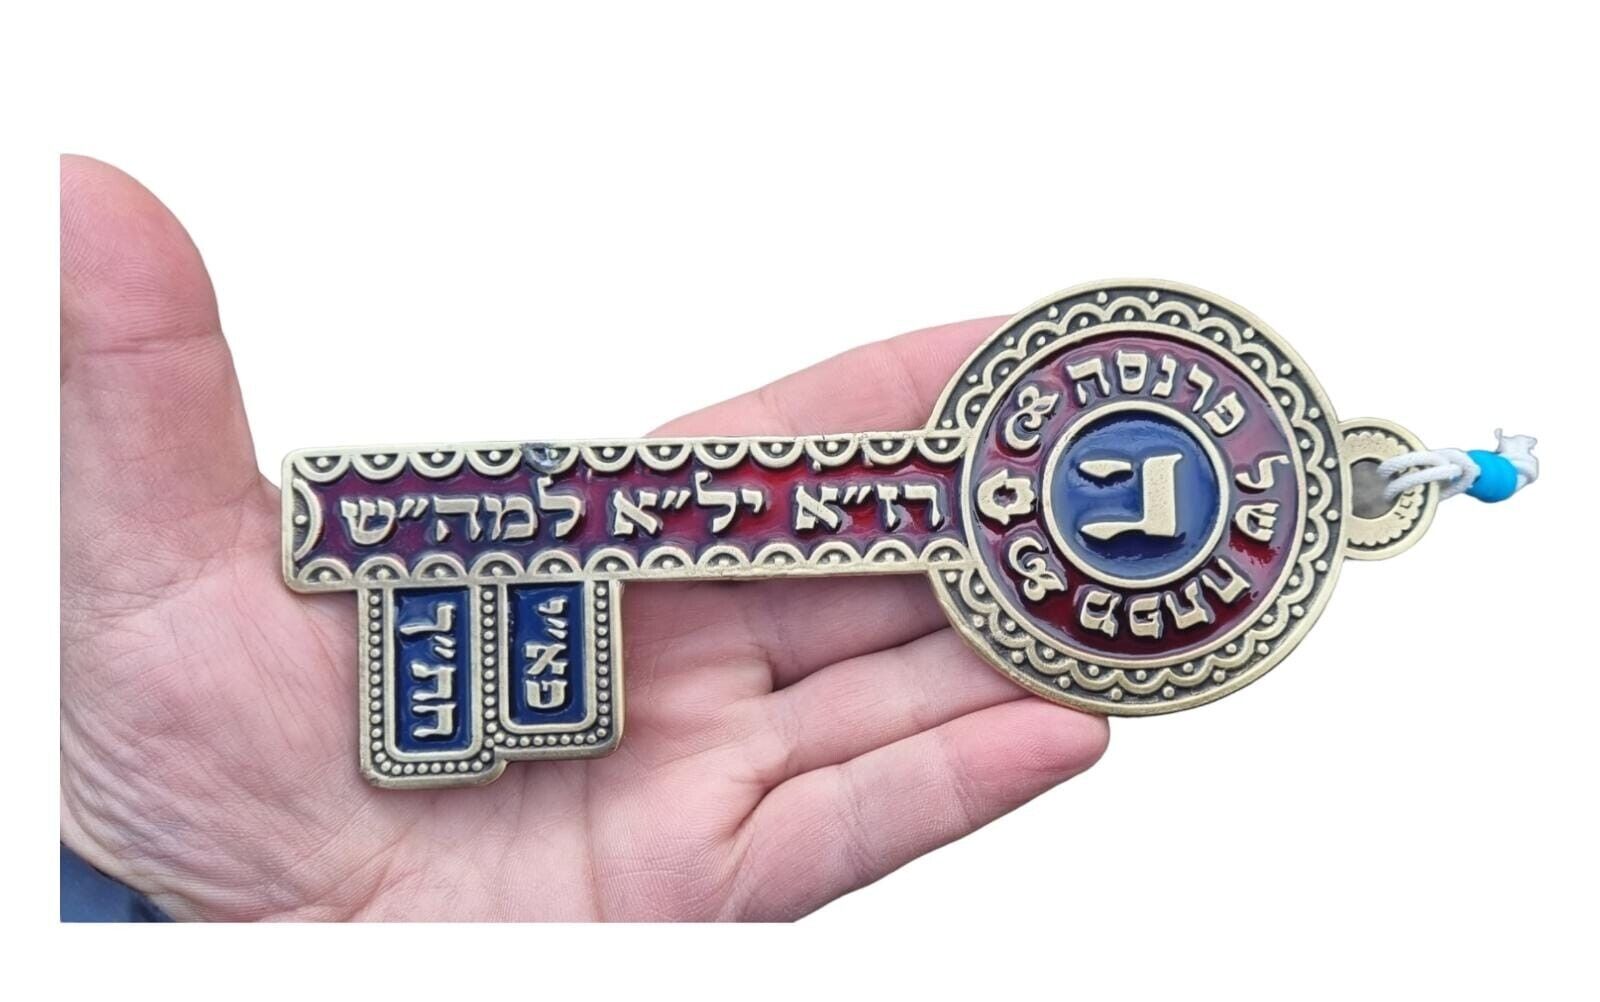 The key LIVELIHOOD KEY kabbalah amulet wall hanging from Israel bless for money